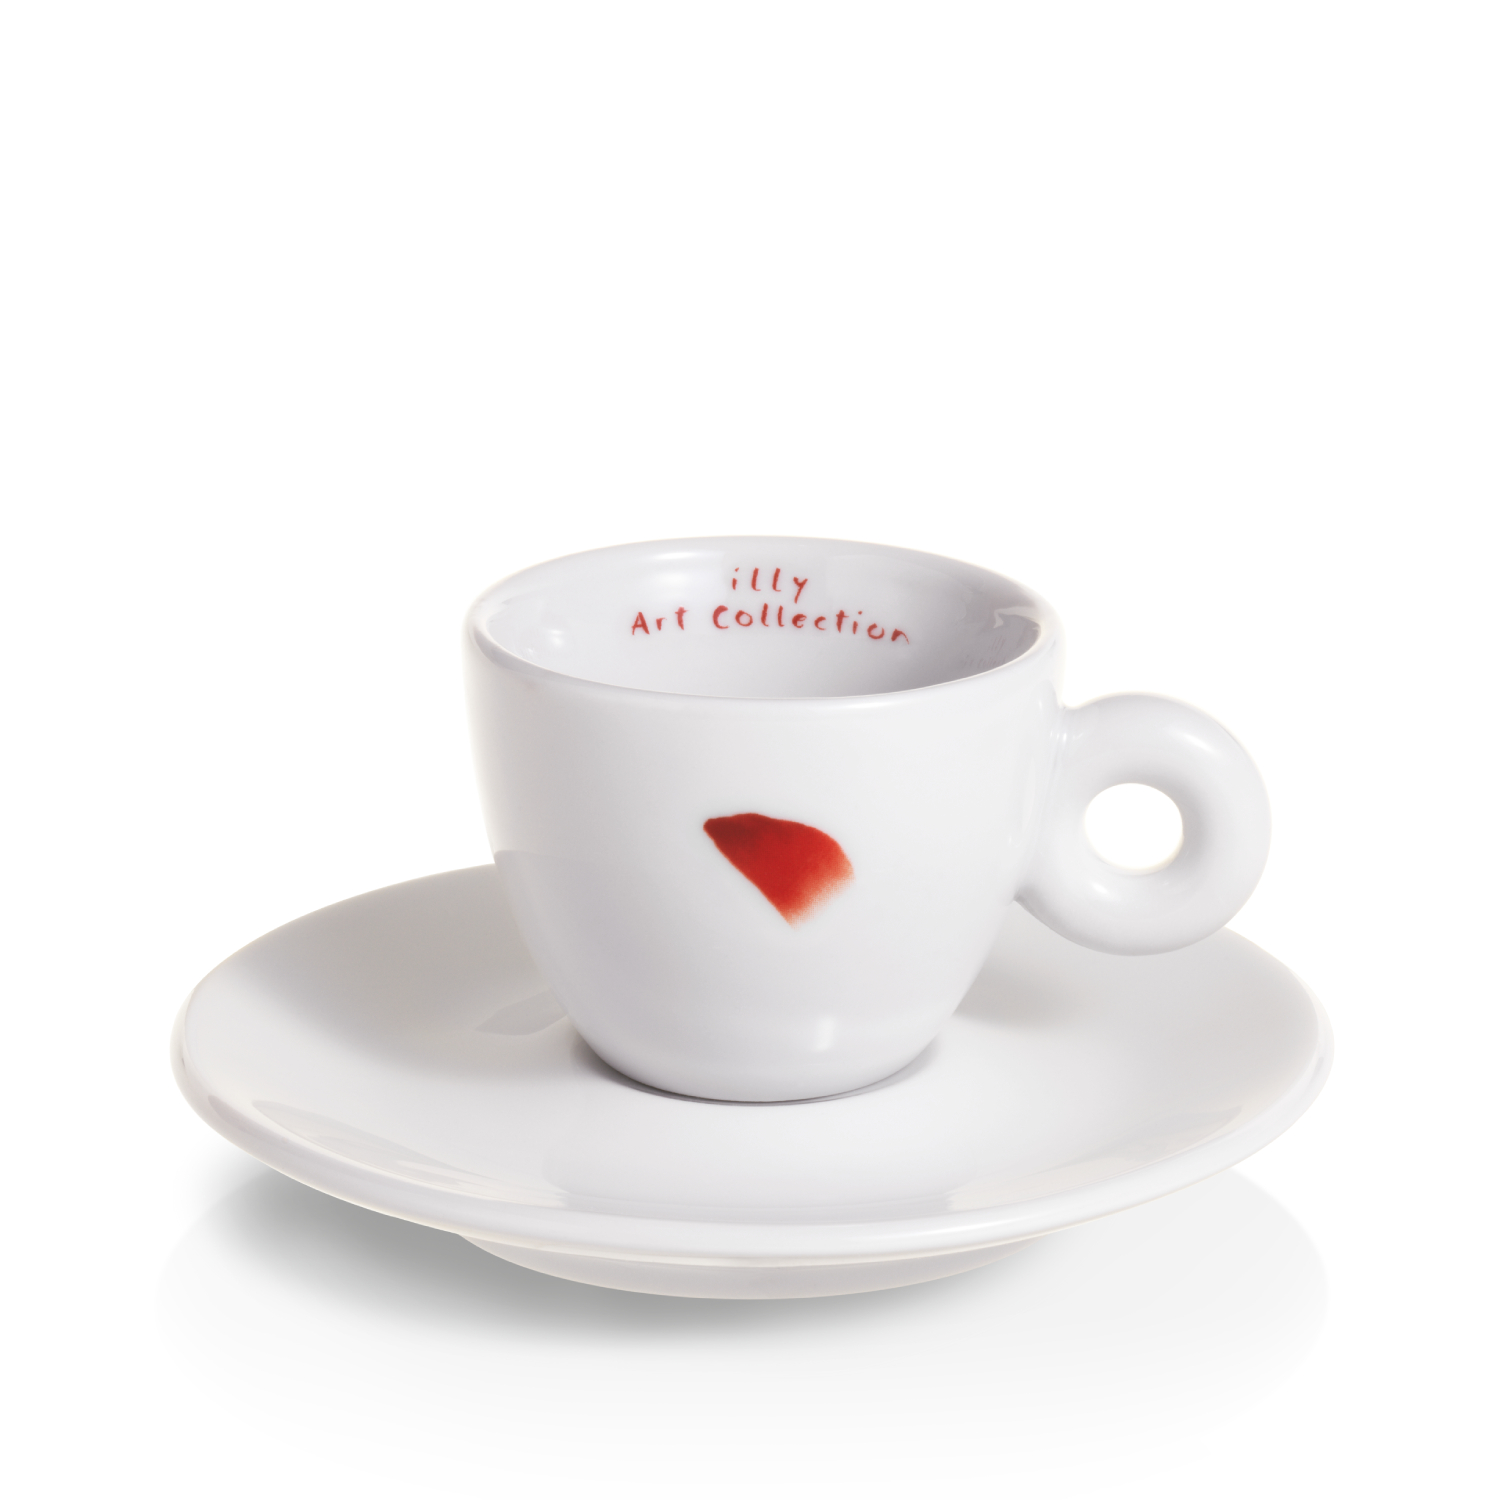 illy Art Collection LEE UFAN Gift Set 2 Espresso Cups, Cups, 02-02-2017